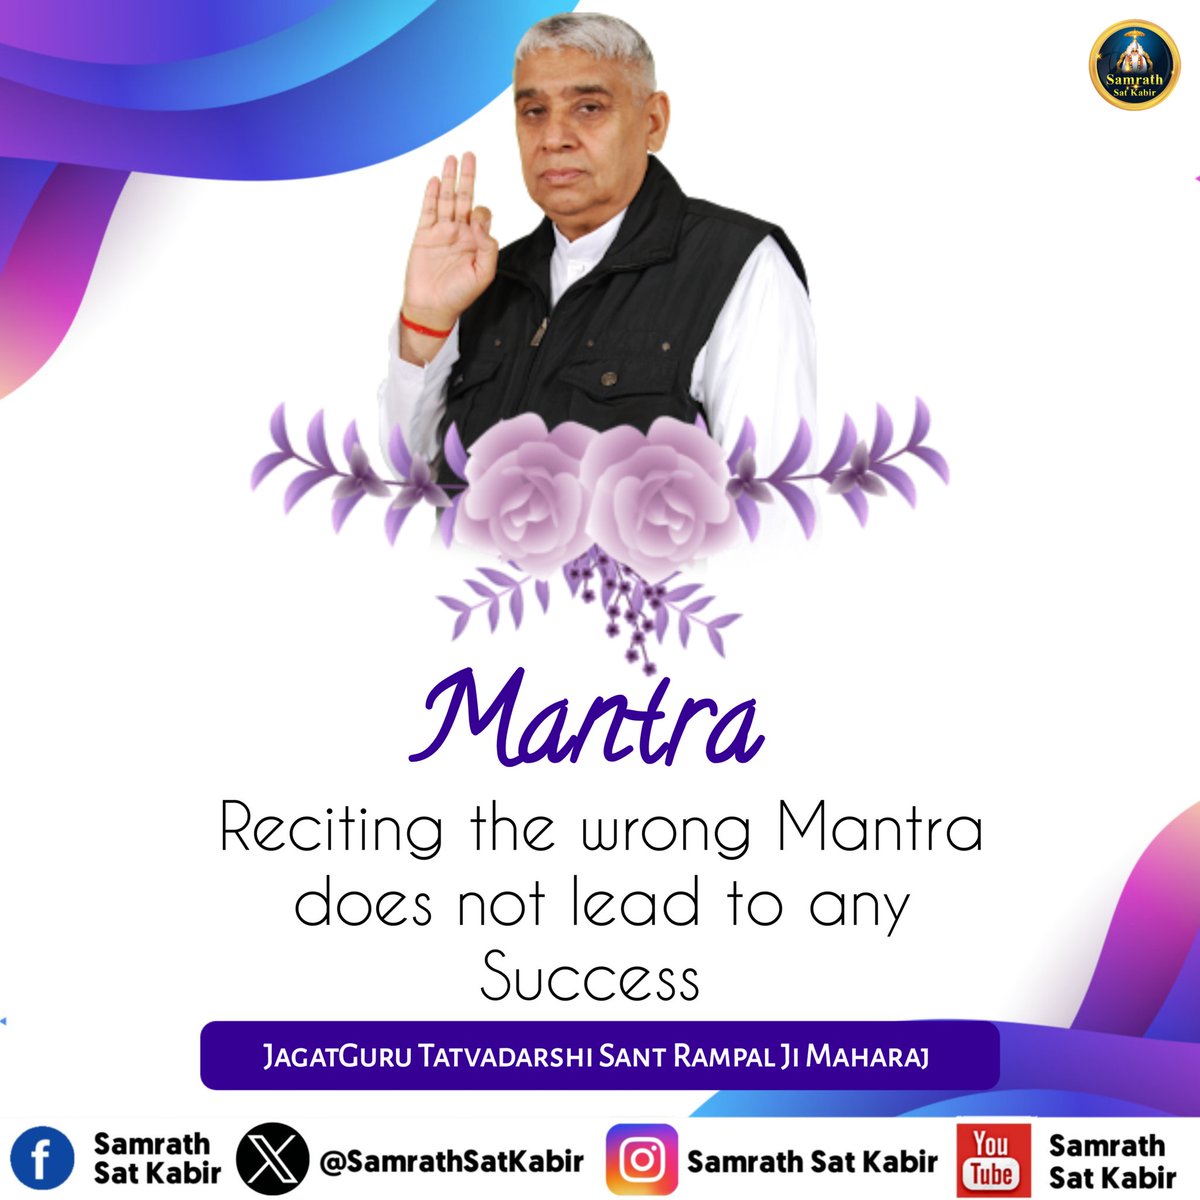 #GodMorningSaturday Mantras Those who chant mantras that are not mentioned in the scriptures, neither attain happiness, nor spiritual success, nor do they attain Salvation. #SaturdayVibes